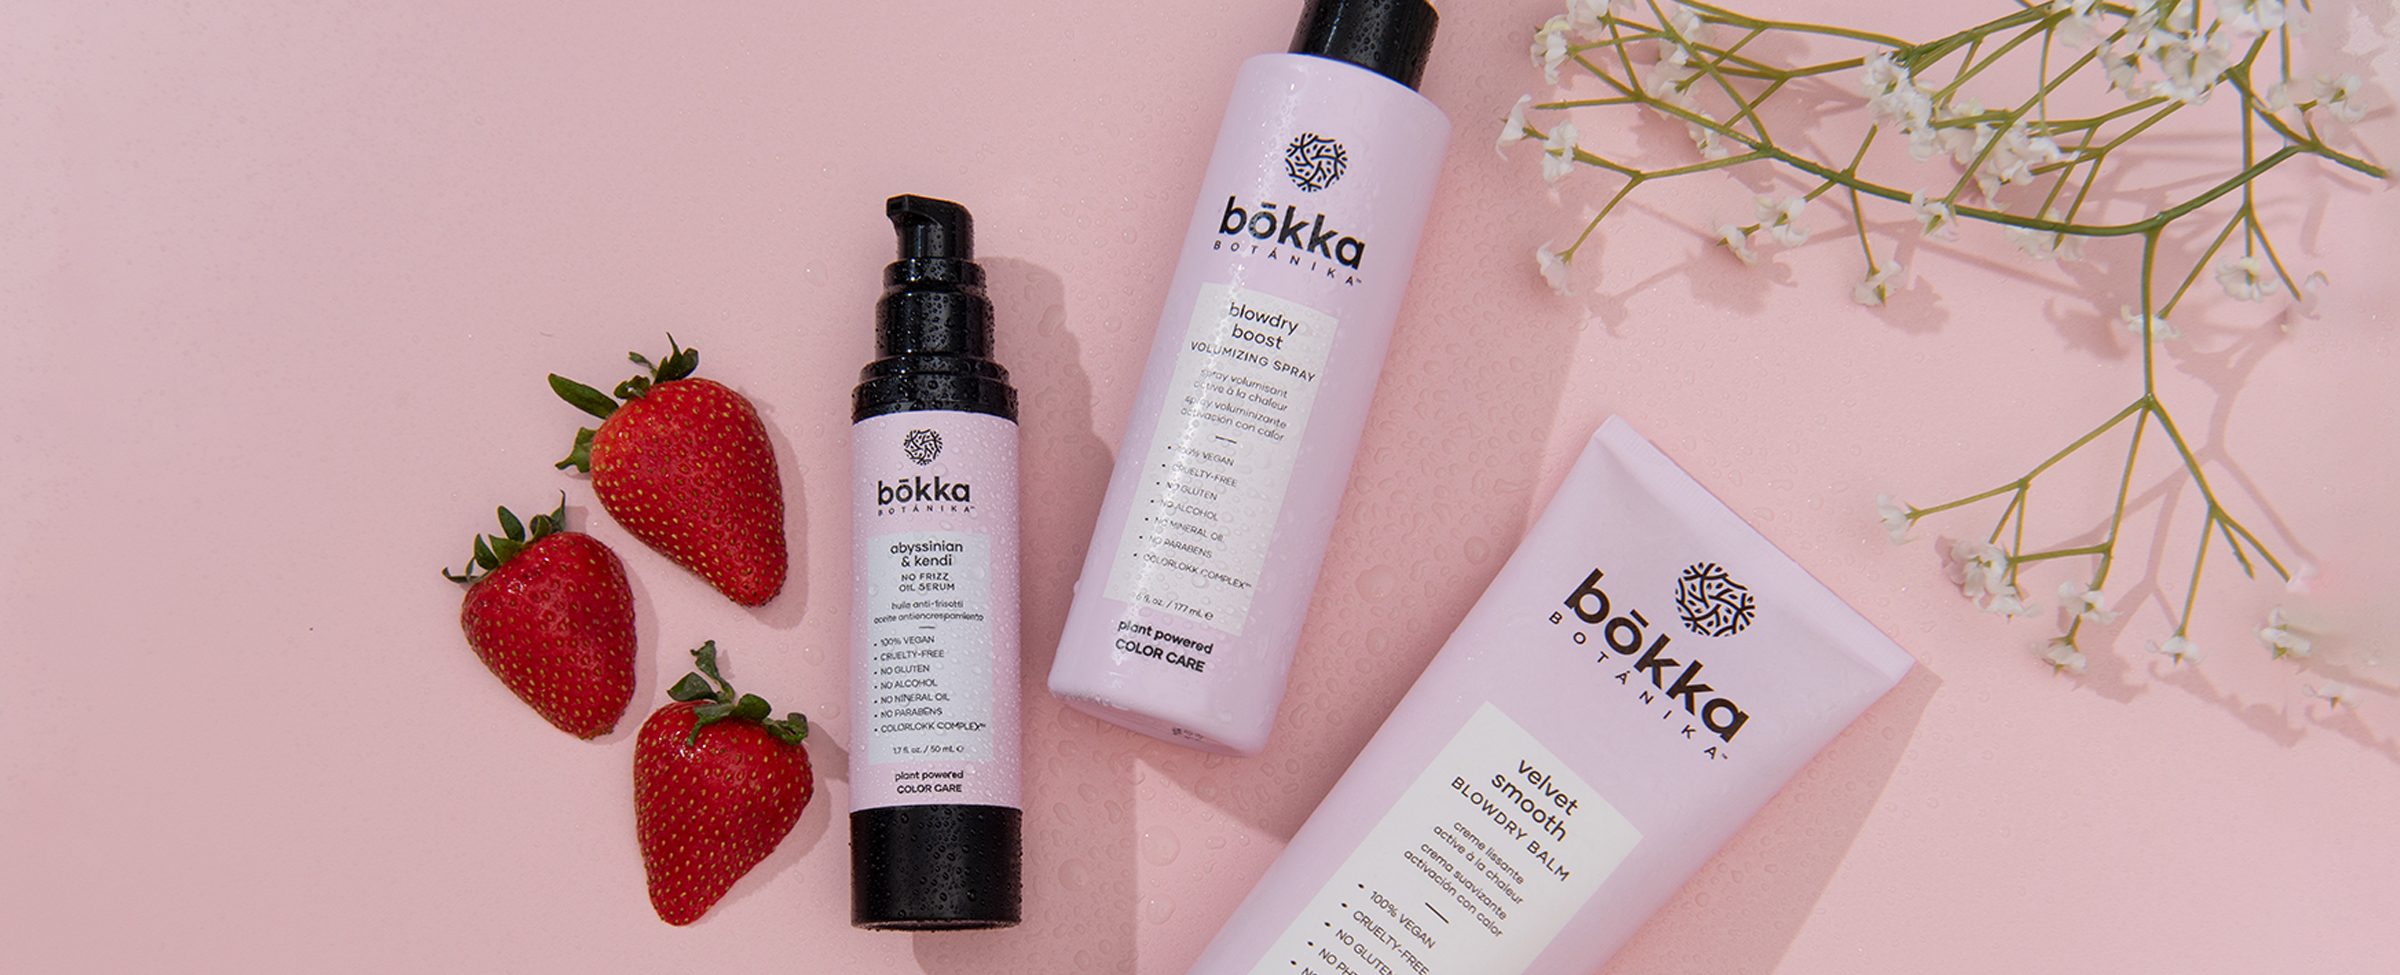 Bokka Styling and finishing collection